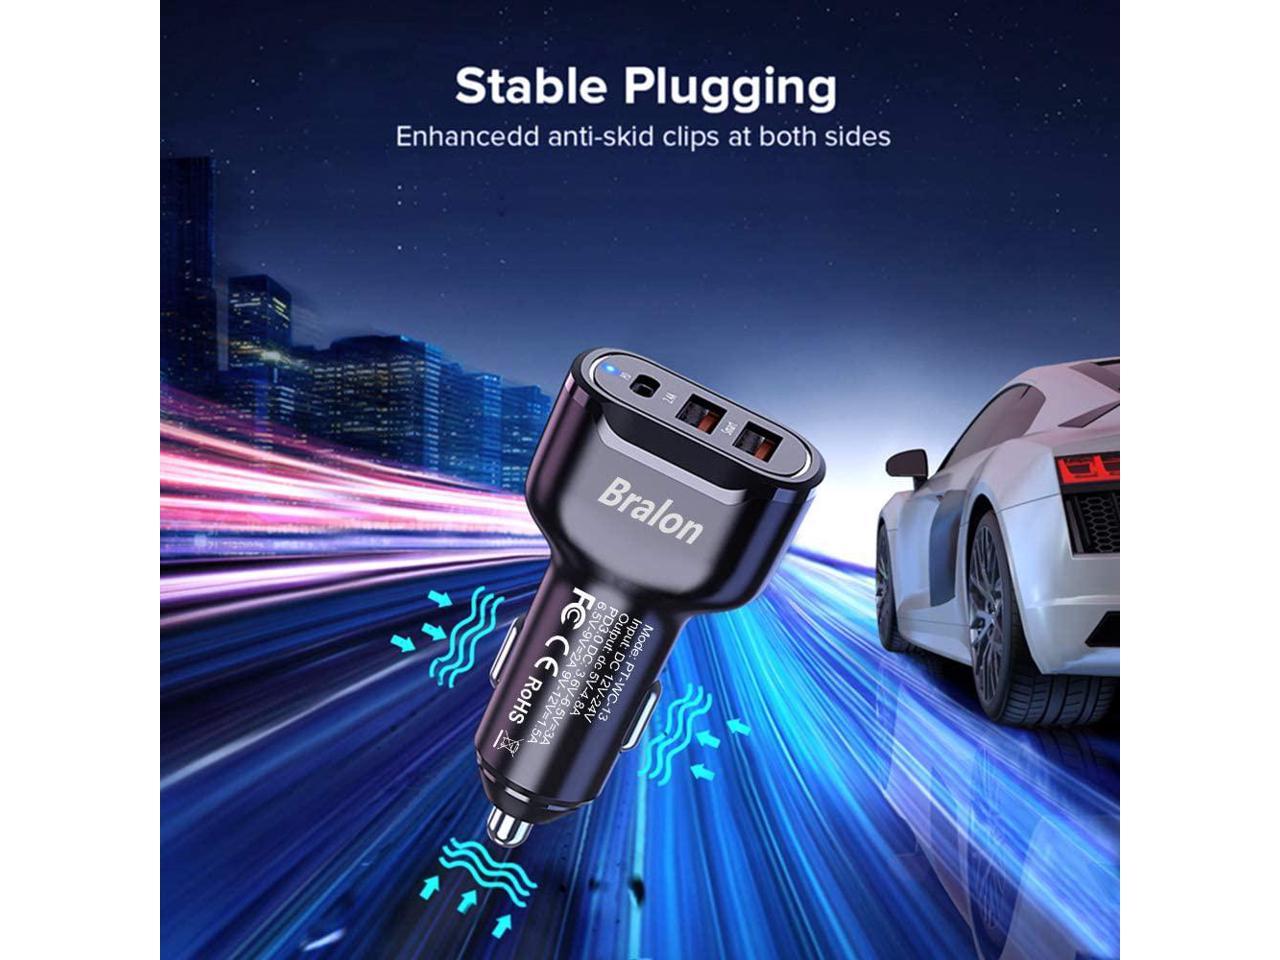 Max Rapid Car Charger Adapter Compatible with Phone 12/12 Pro Max 20W PD 3.0 & Dual USB-A 24W/4.8A USB C Car Charger,Bralon 44W /XS/XR/X/8/7,Galaxy Note S10 S9 S8 S7 & More /12 mini/11/11 Pro 